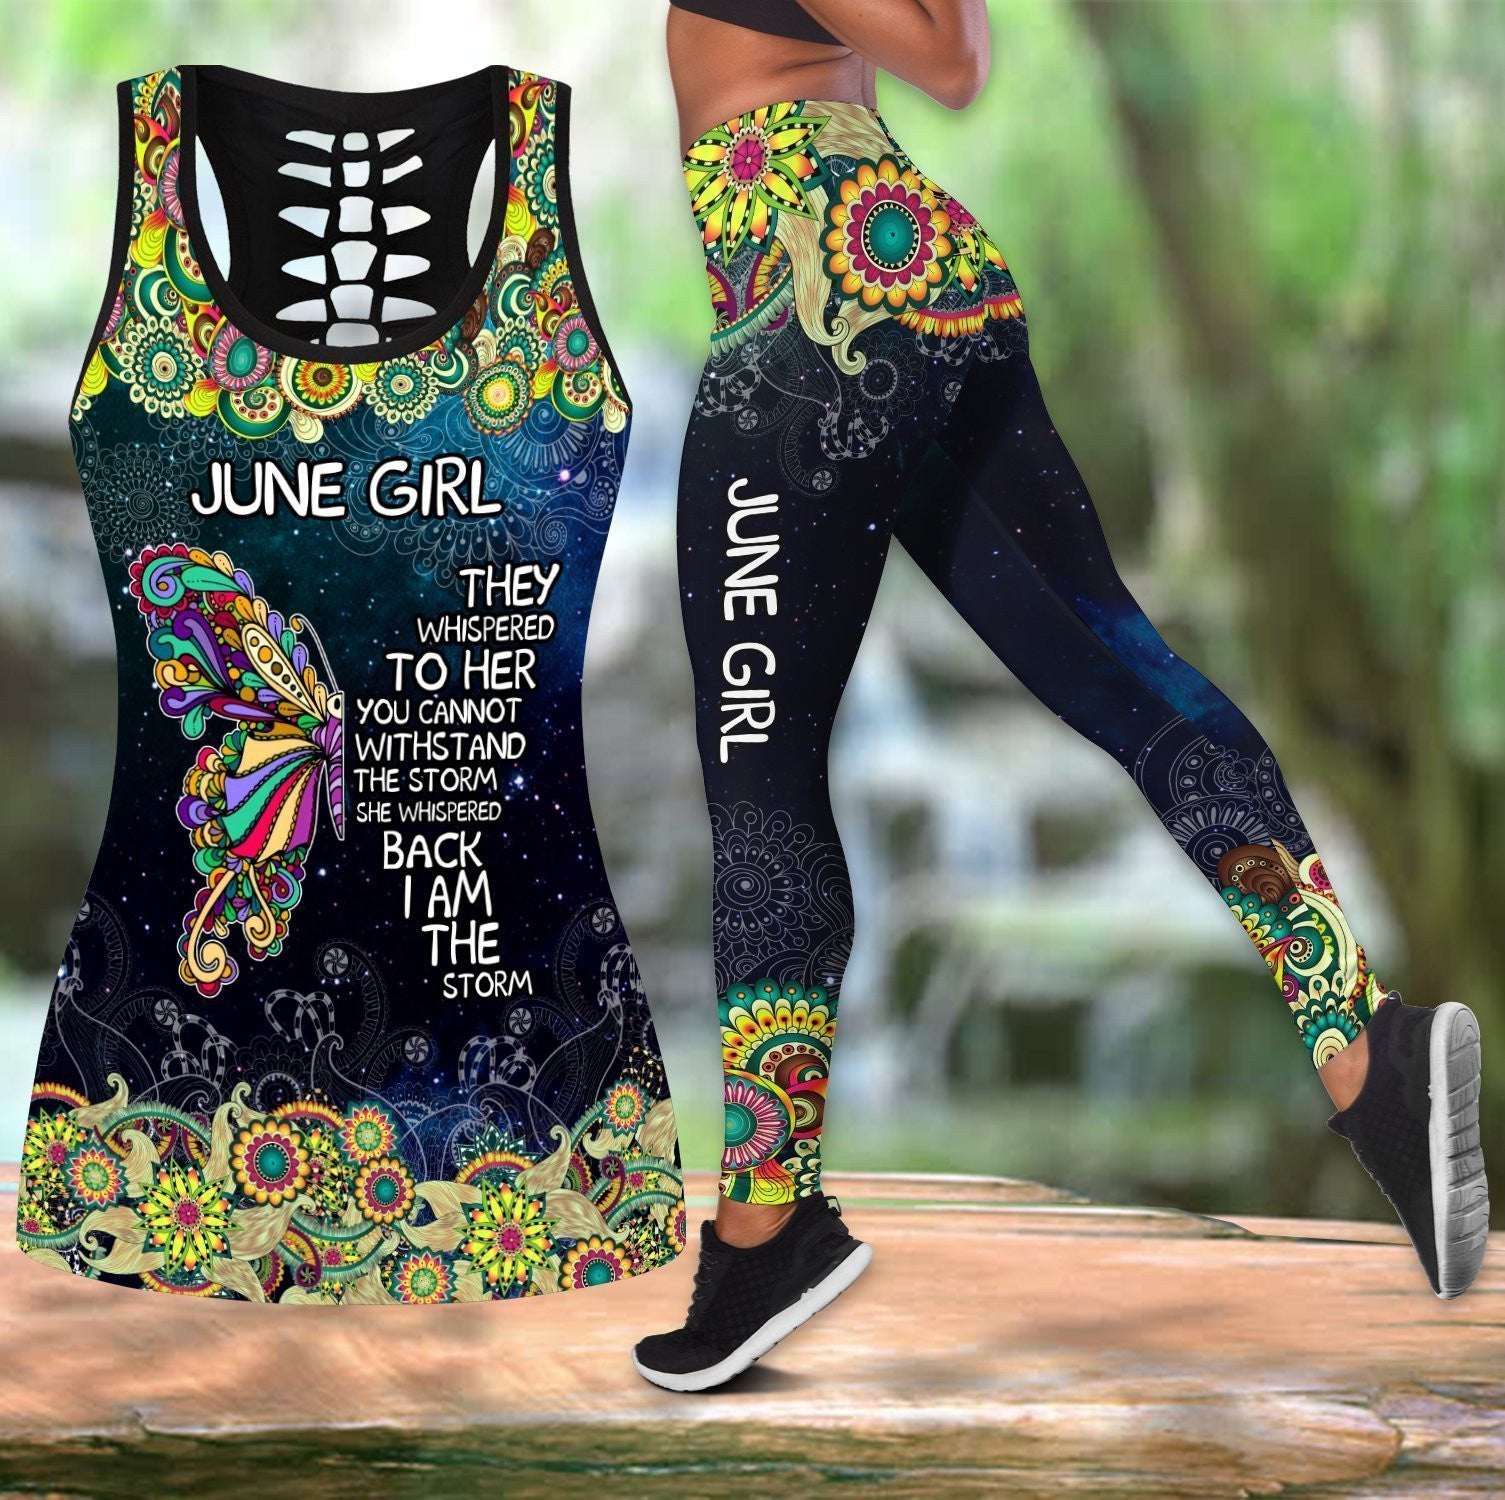 June Girl They Whispered To Her You Cannot Withstand - Christian Tank Top And Legging Sets For Women